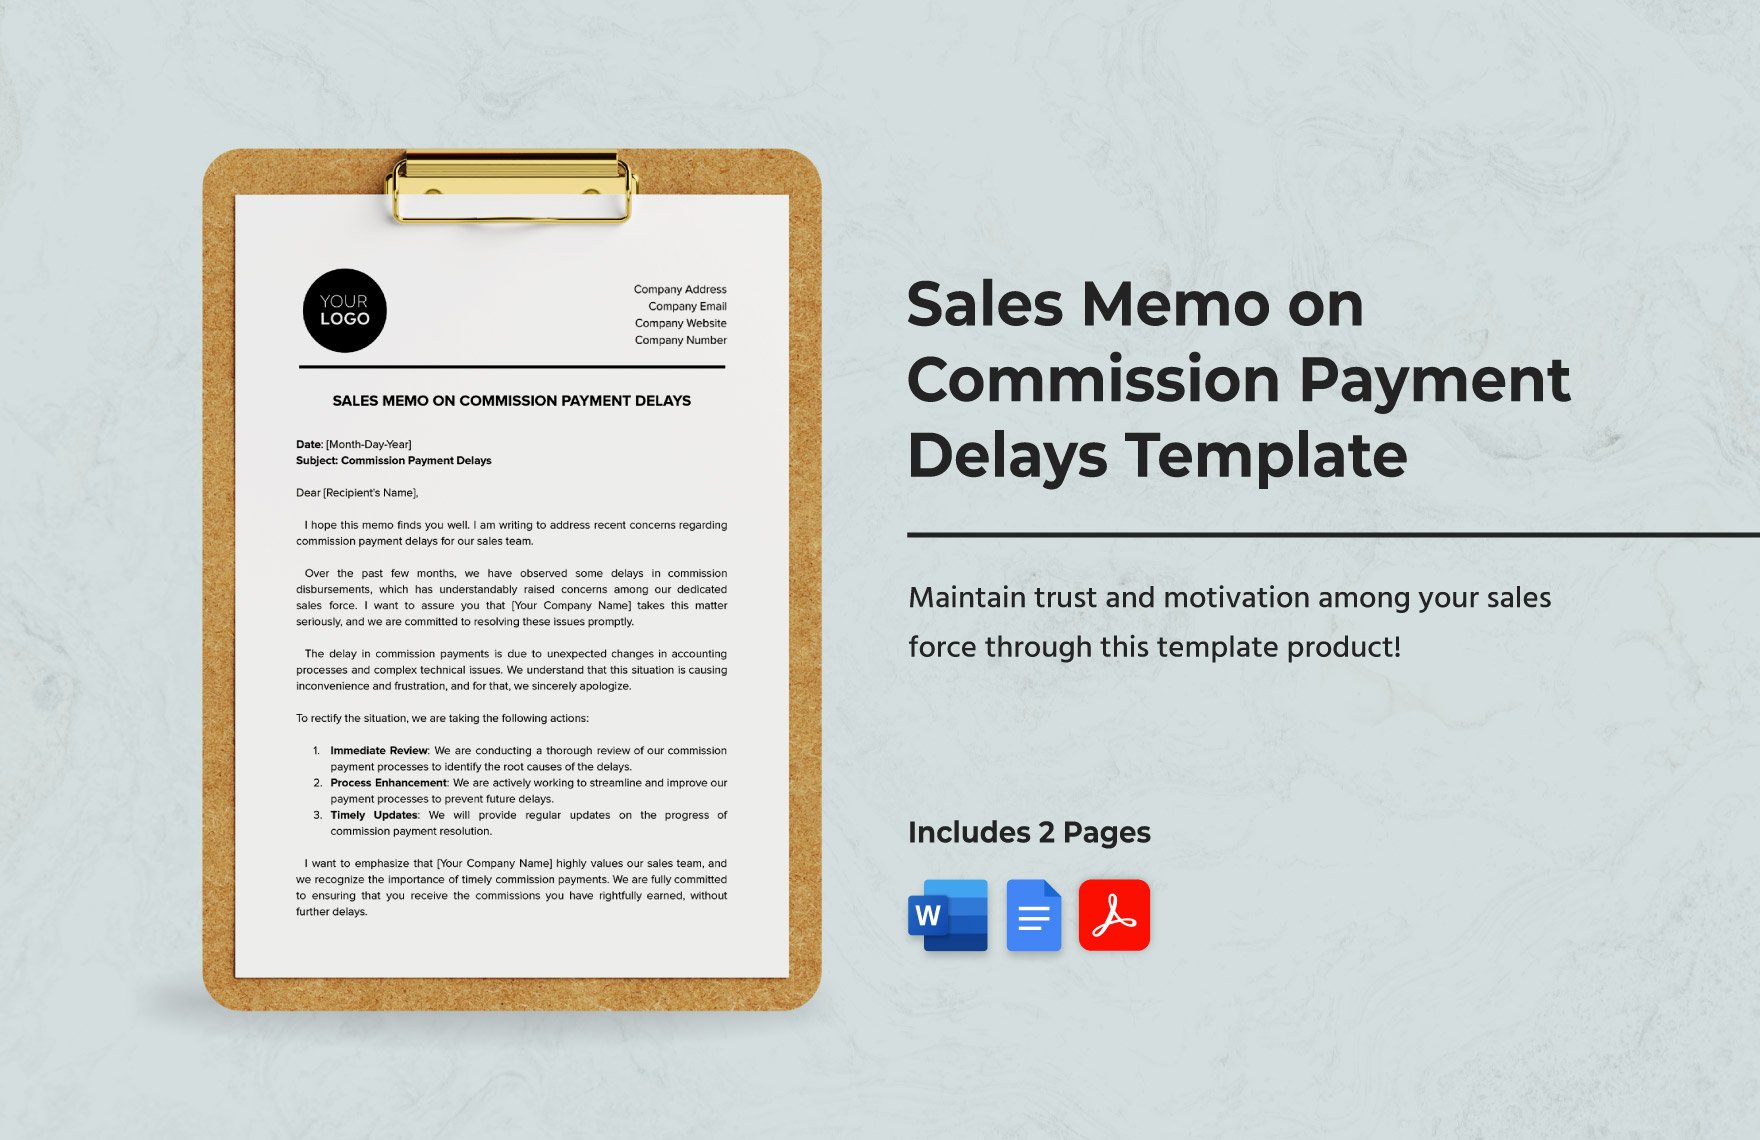 Sales Memo on Commission Payment Delays Template